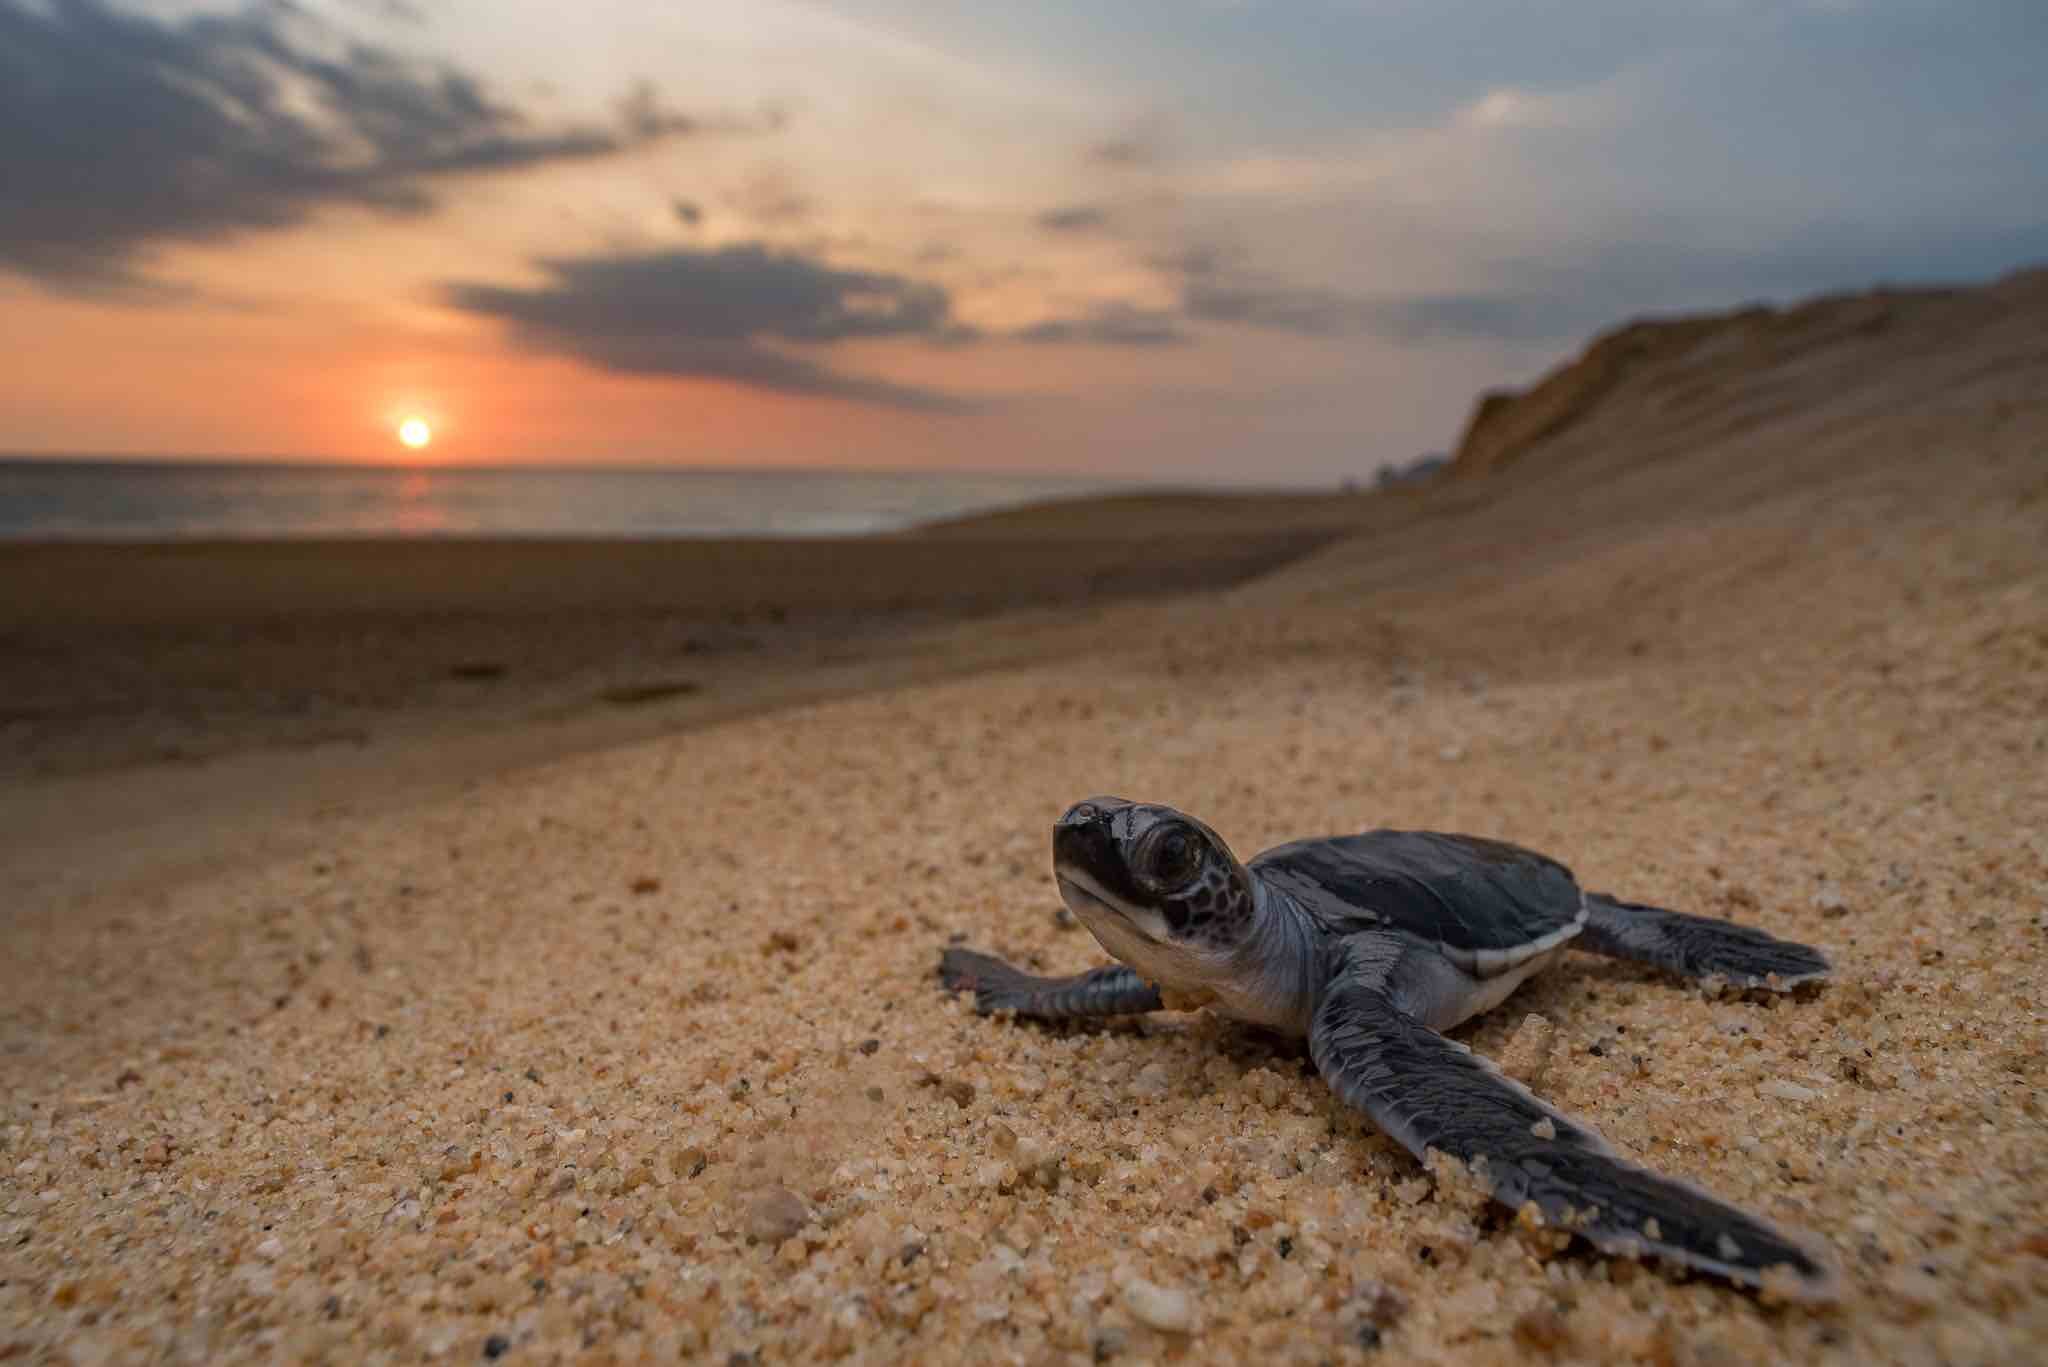   Help Save A Baby Turtle  